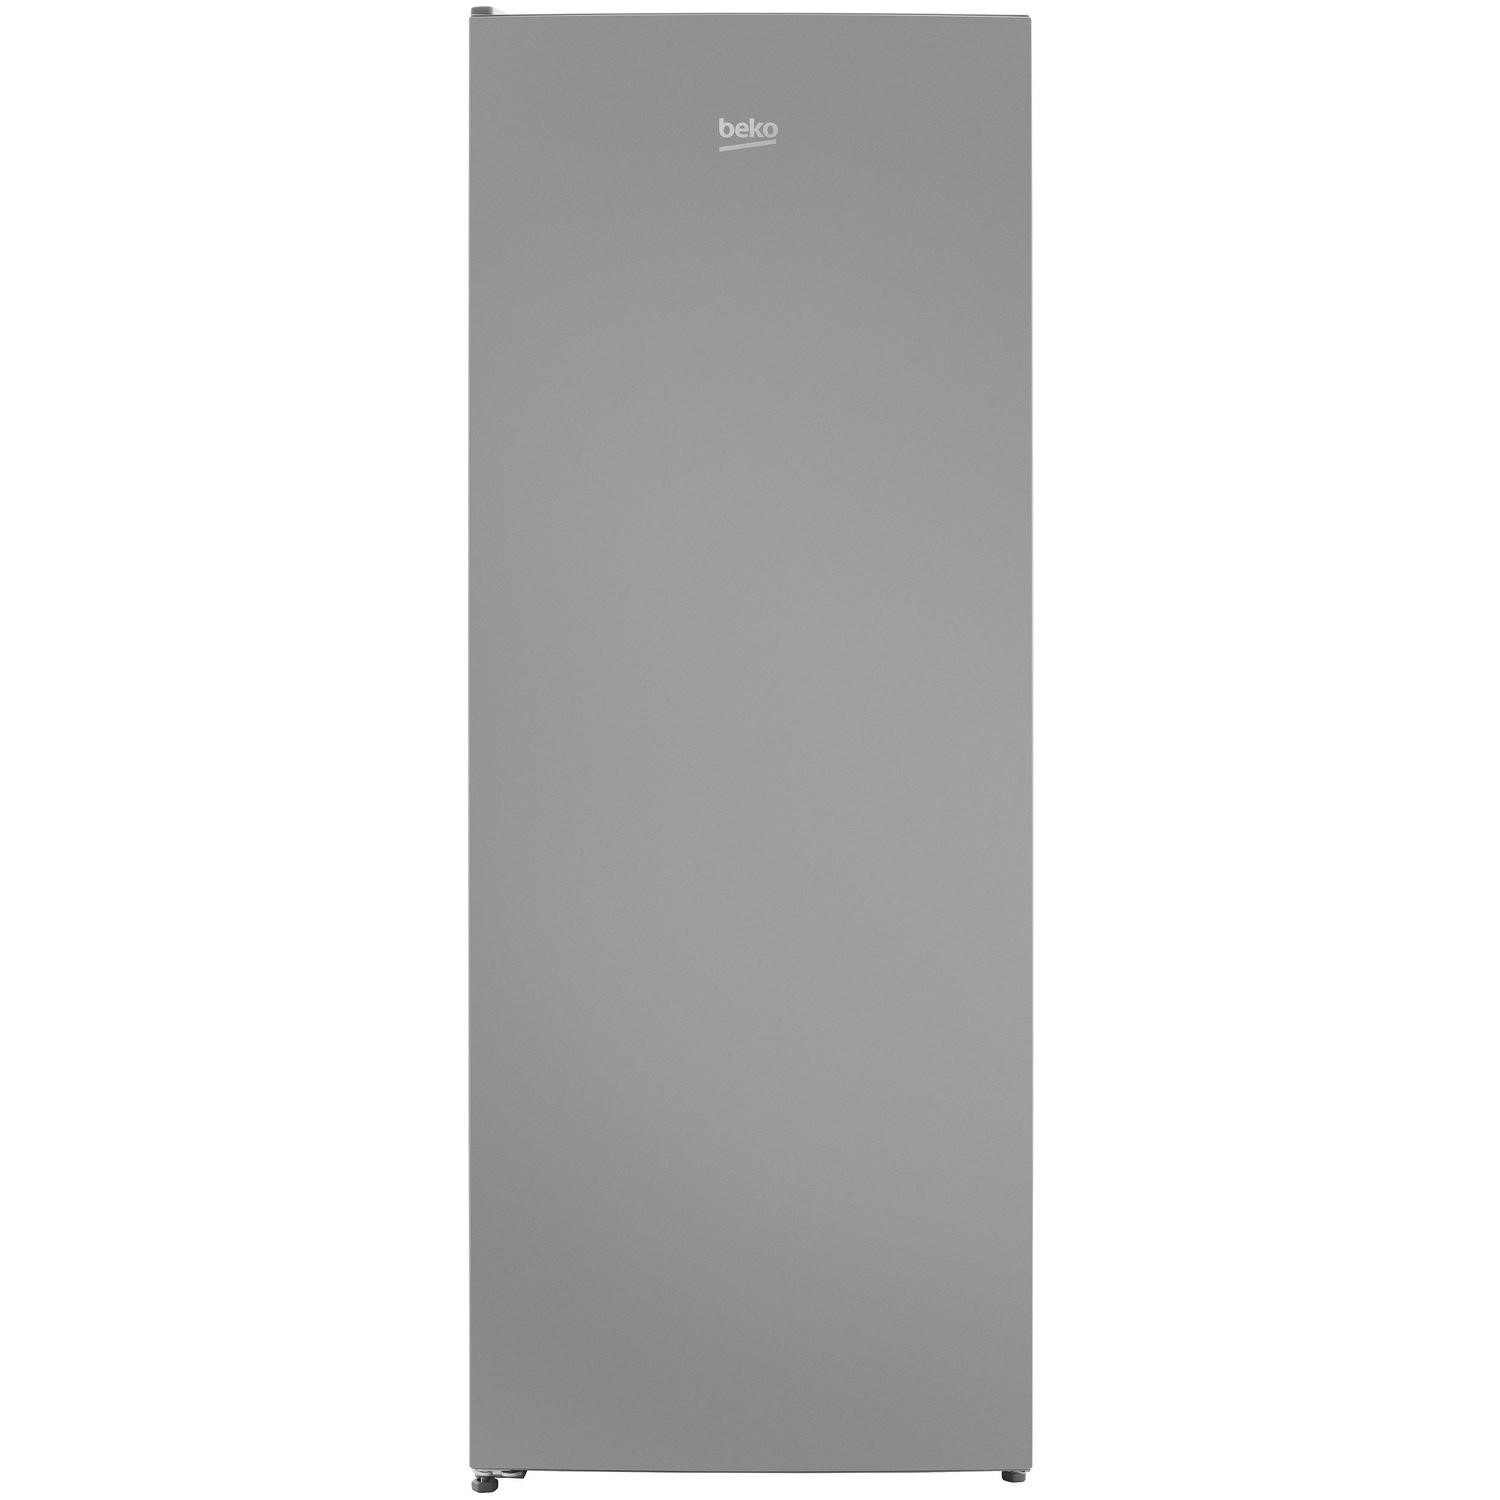 Beko FFG1545S Frost Free Upright Freezer - Silver - F Rated